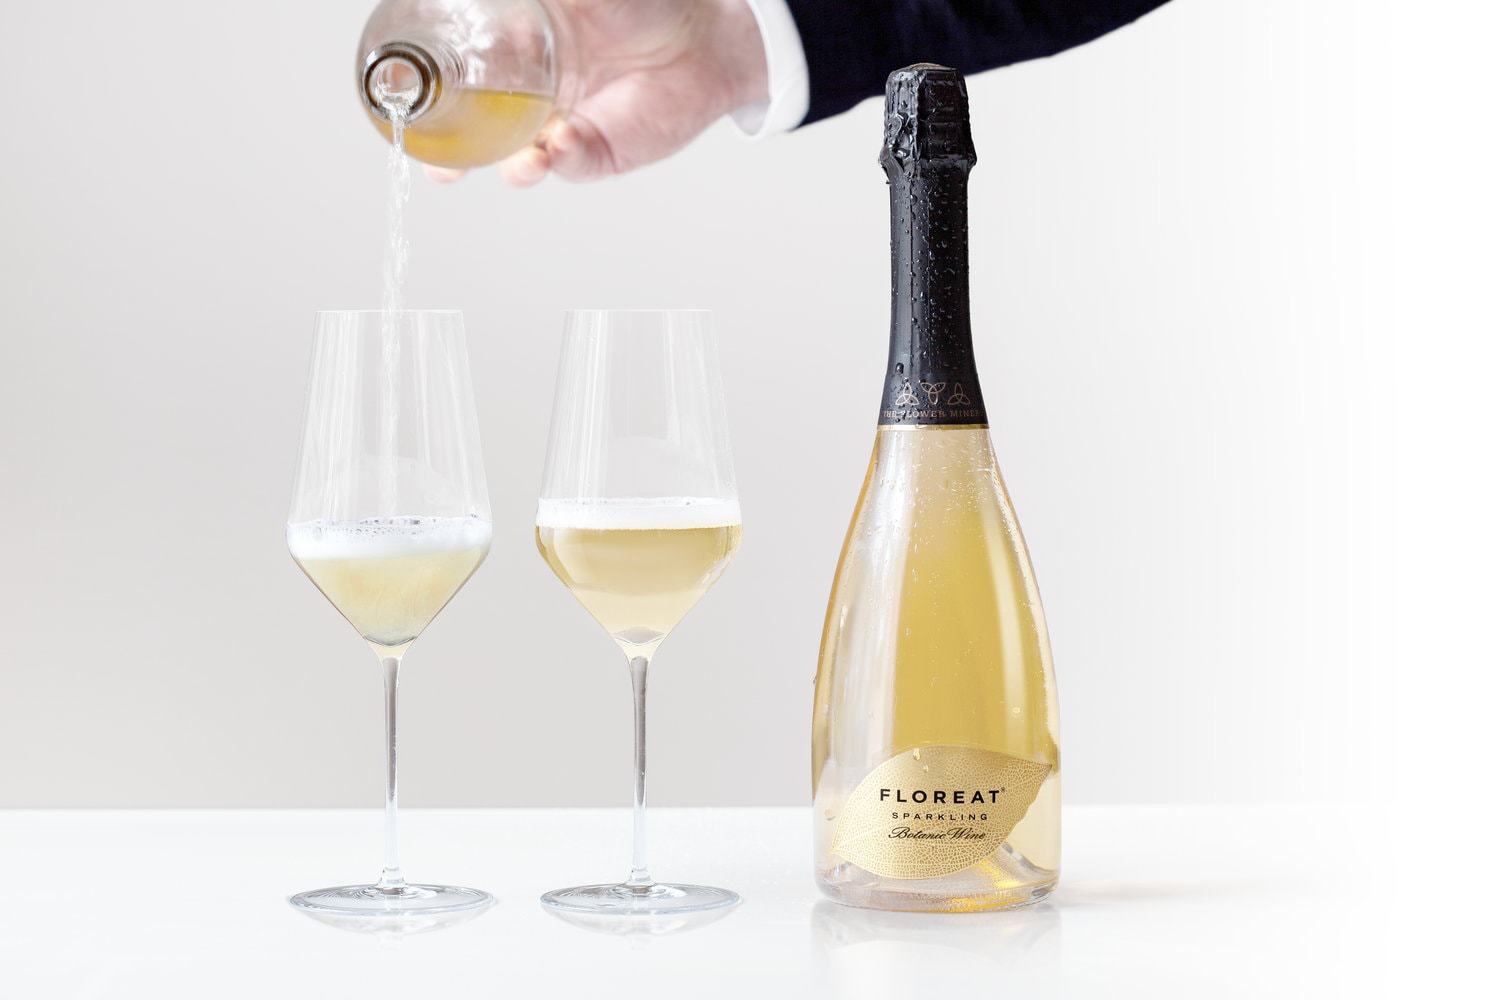 Lewis Moberly Creates Disruptive Identity for New Low Alcohol Sparkling Wine, Floreat